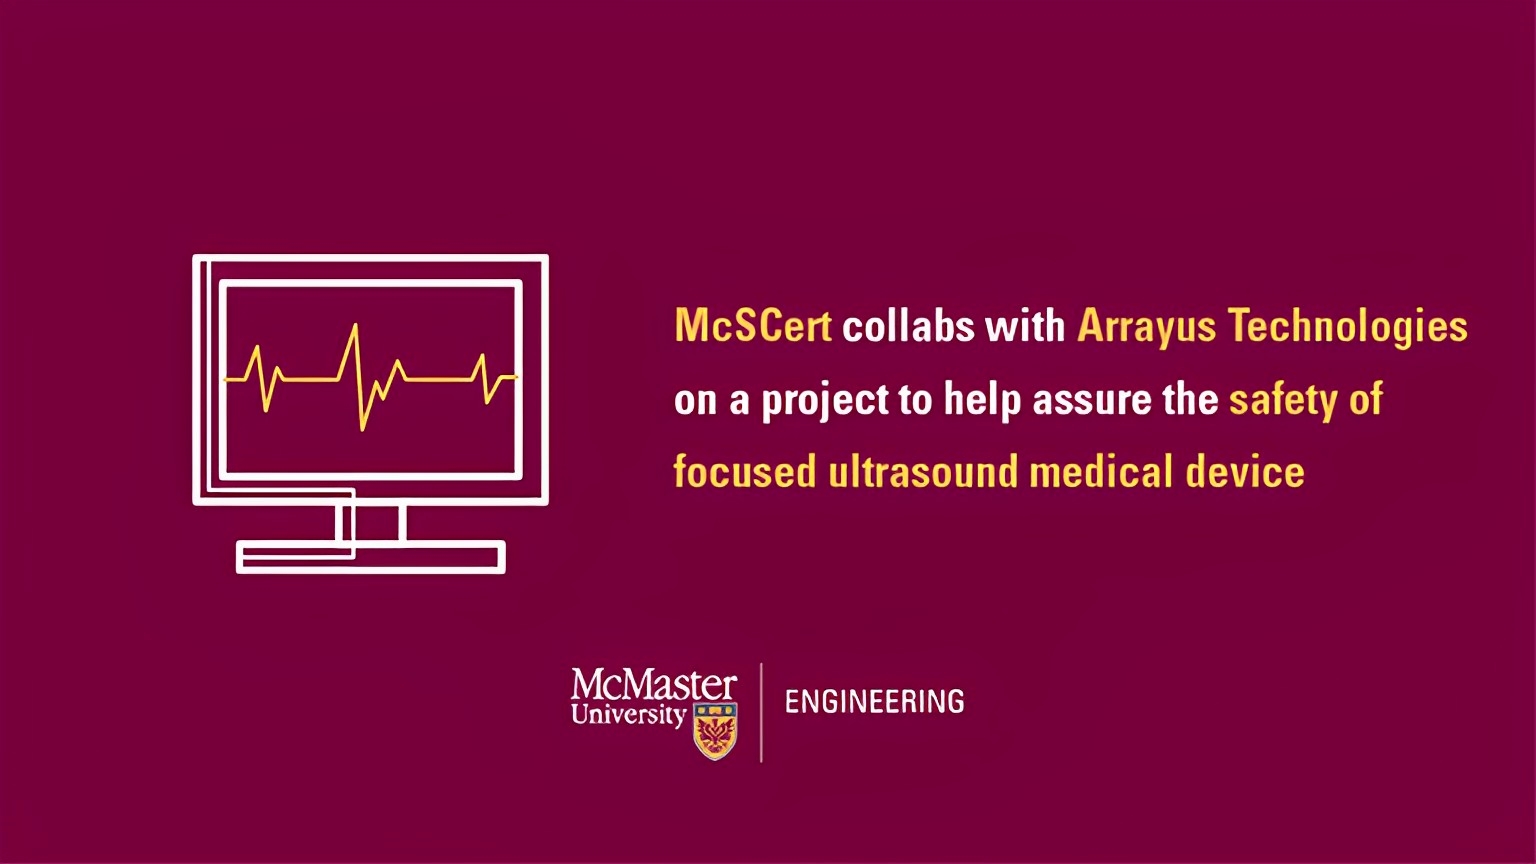 McSCert collabs with Arrayus Technologies on a project to help assure the safety of focused ultrasound medical device